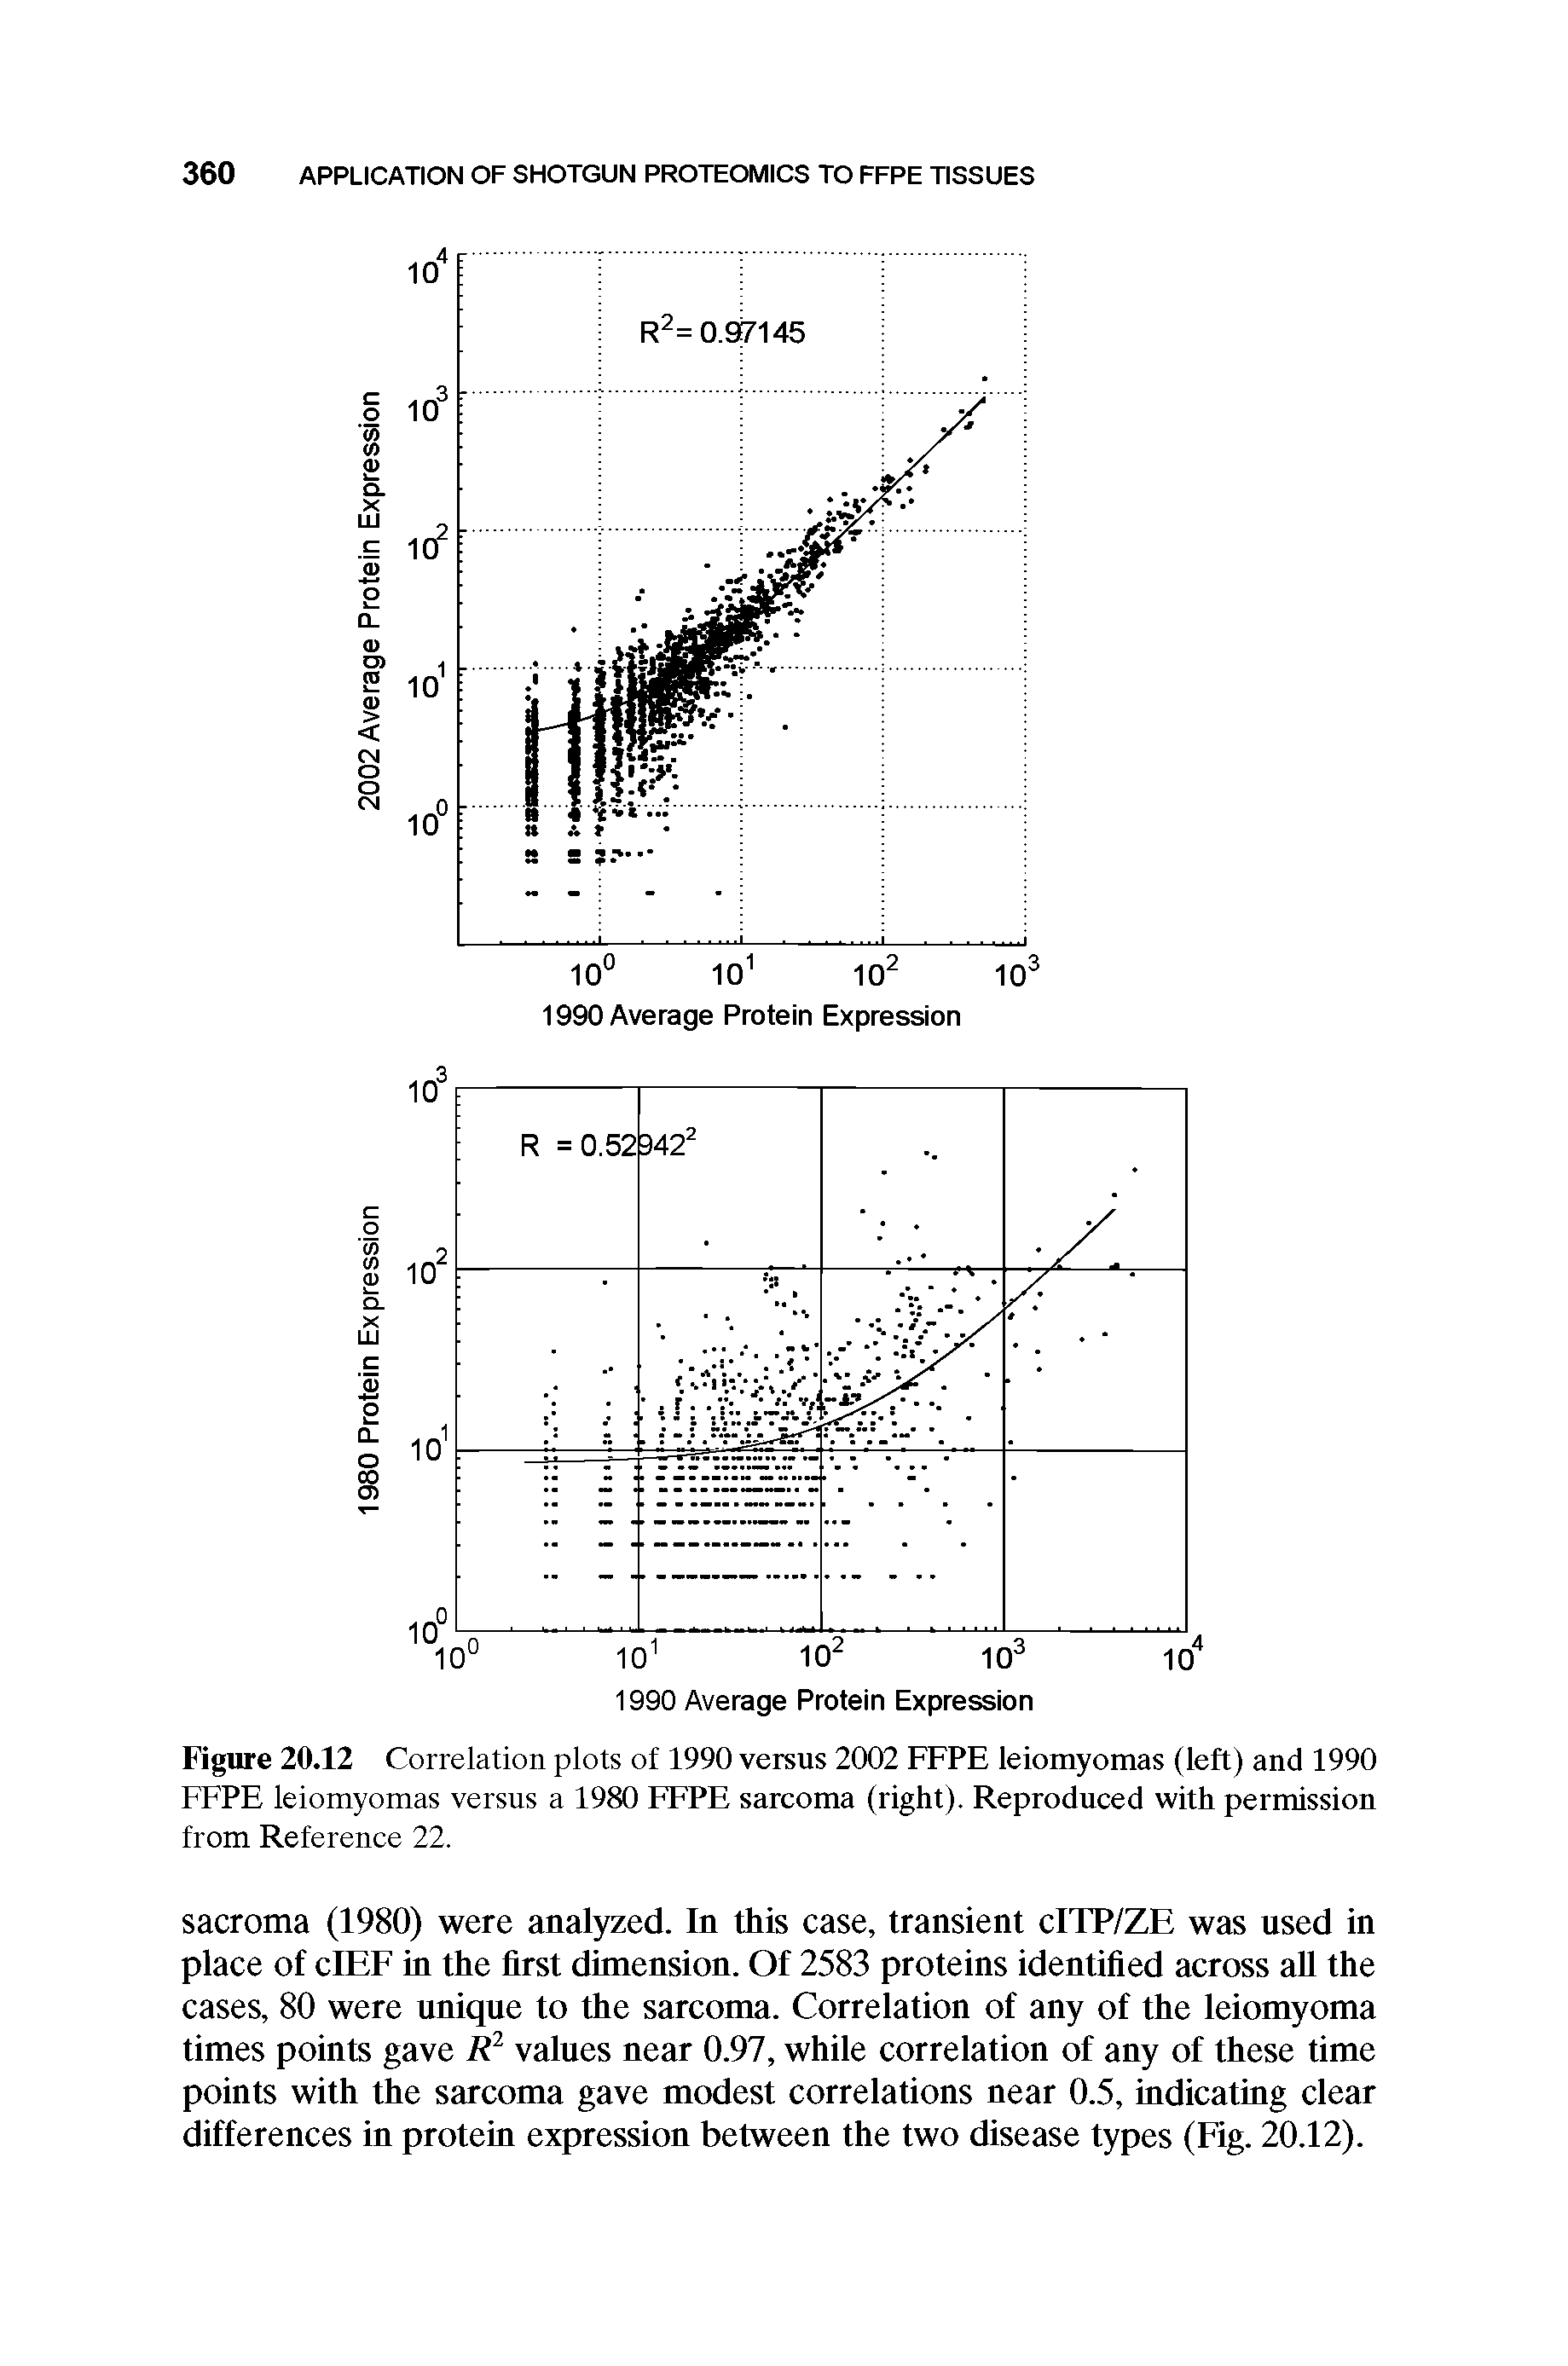 Figure 20.12 Correlation plots of 1990 versus 2002 FFPE leiomyomas (left) and 1990 FFPE leiomyomas versus a 1980 FFPE sarcoma (right). Reproduced with permission from Reference 22.